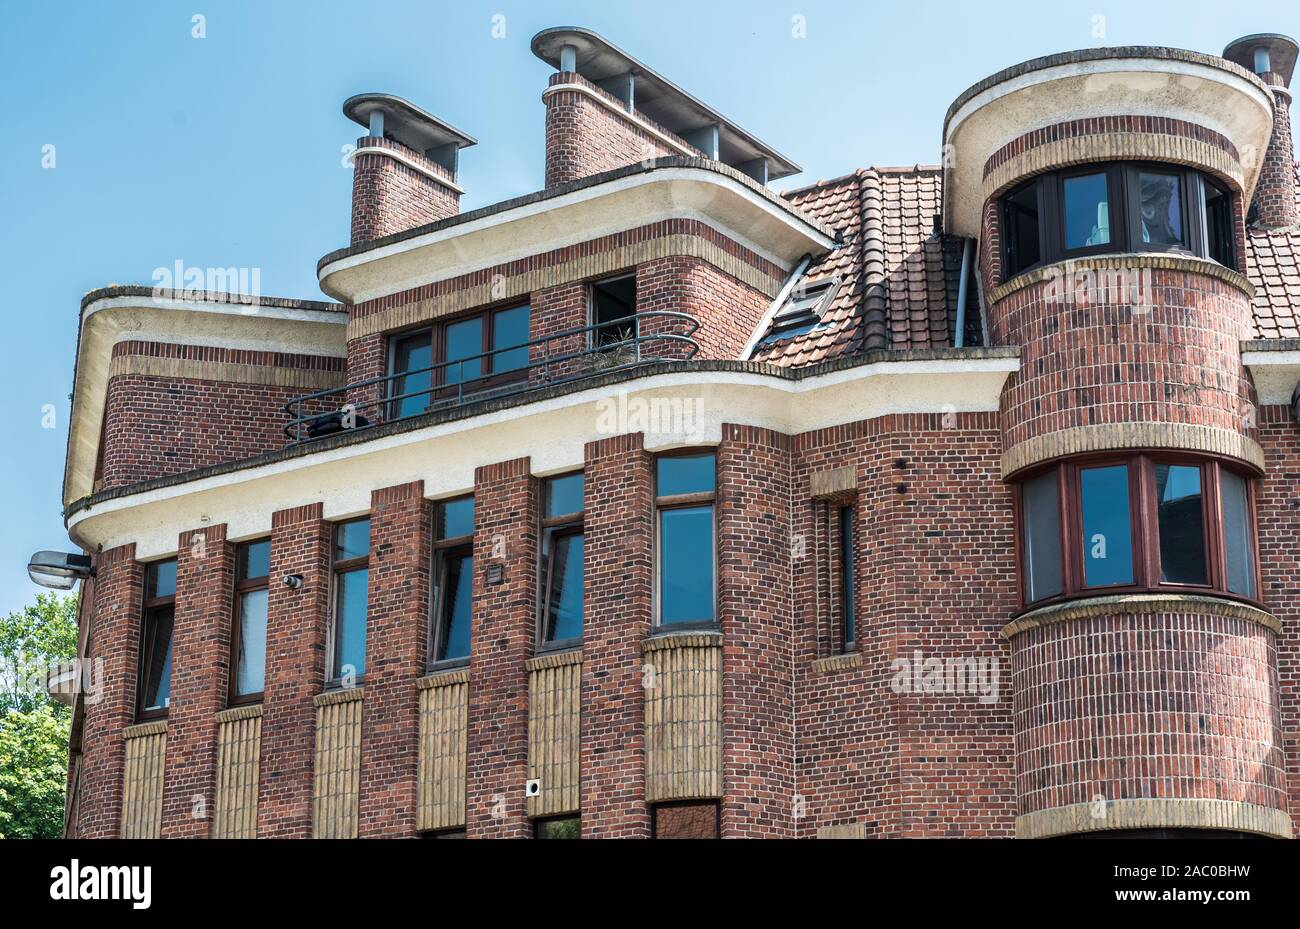 Anderlecht, Brussels / Belgium - 06 26 2019: Brick stone shaped facade of a residential apartment in modernist style Stock Photo